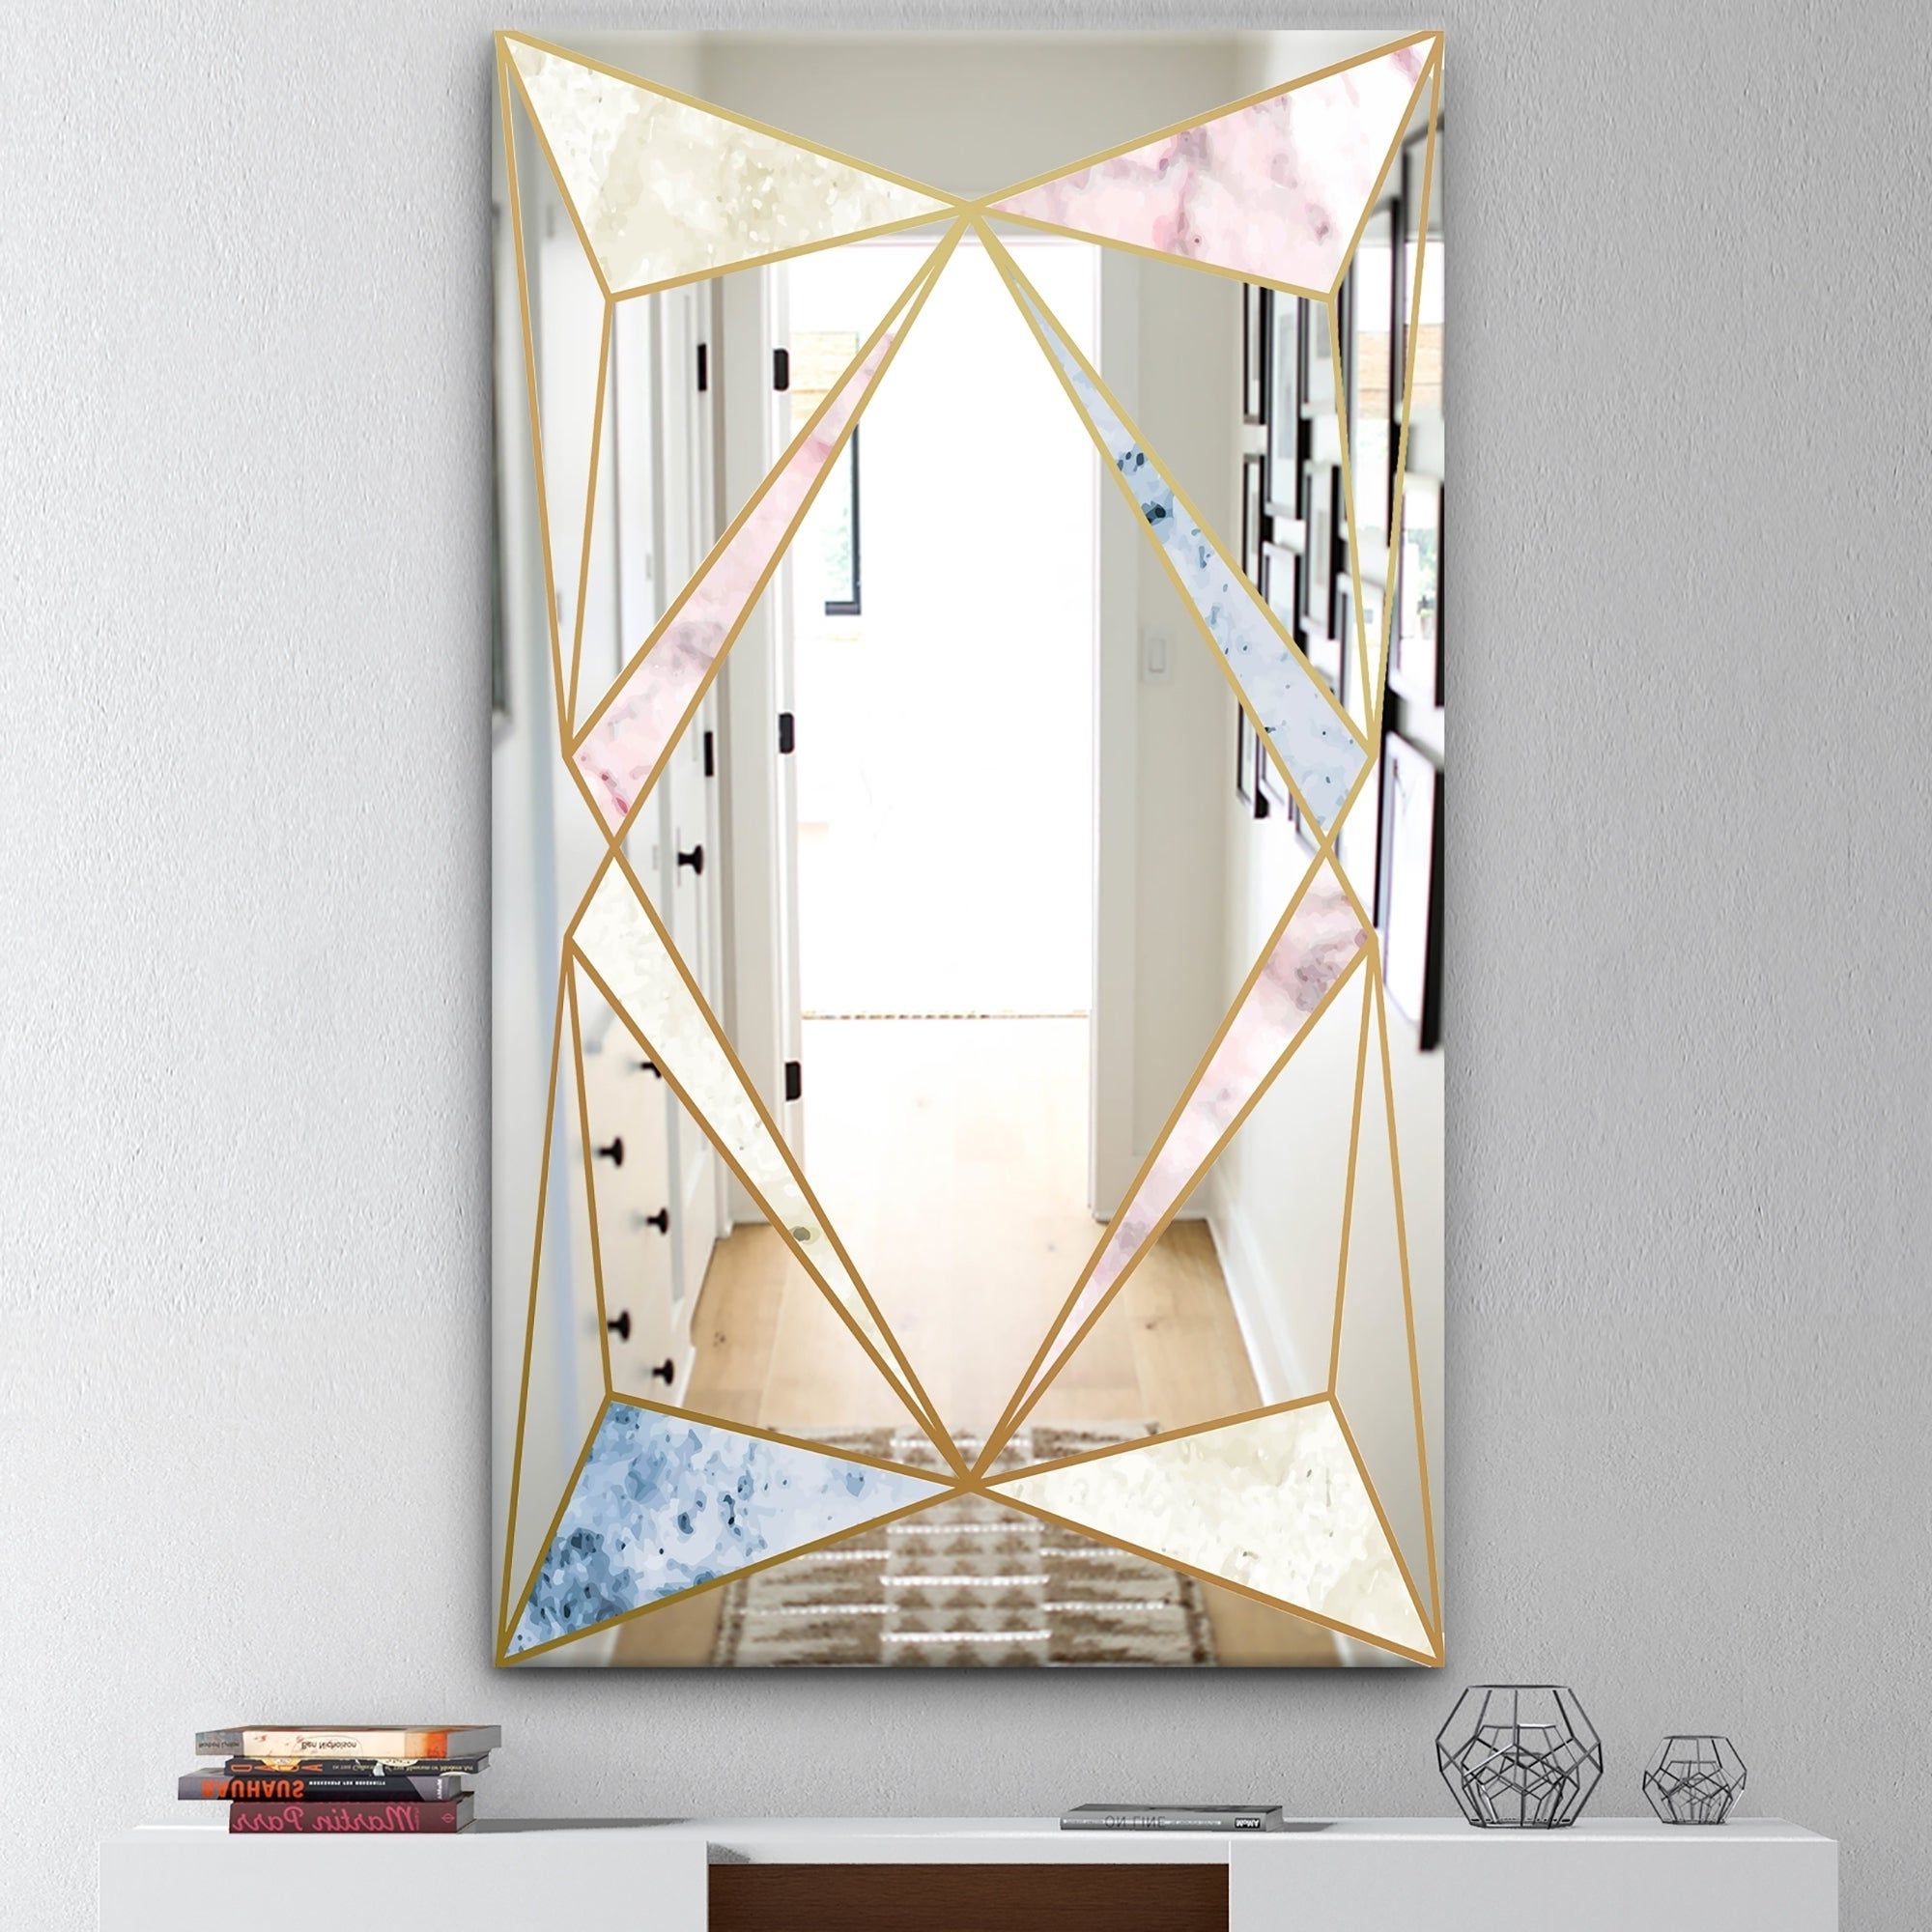 The 20 Best Collection of Mid Century Modern Wall Mirrors